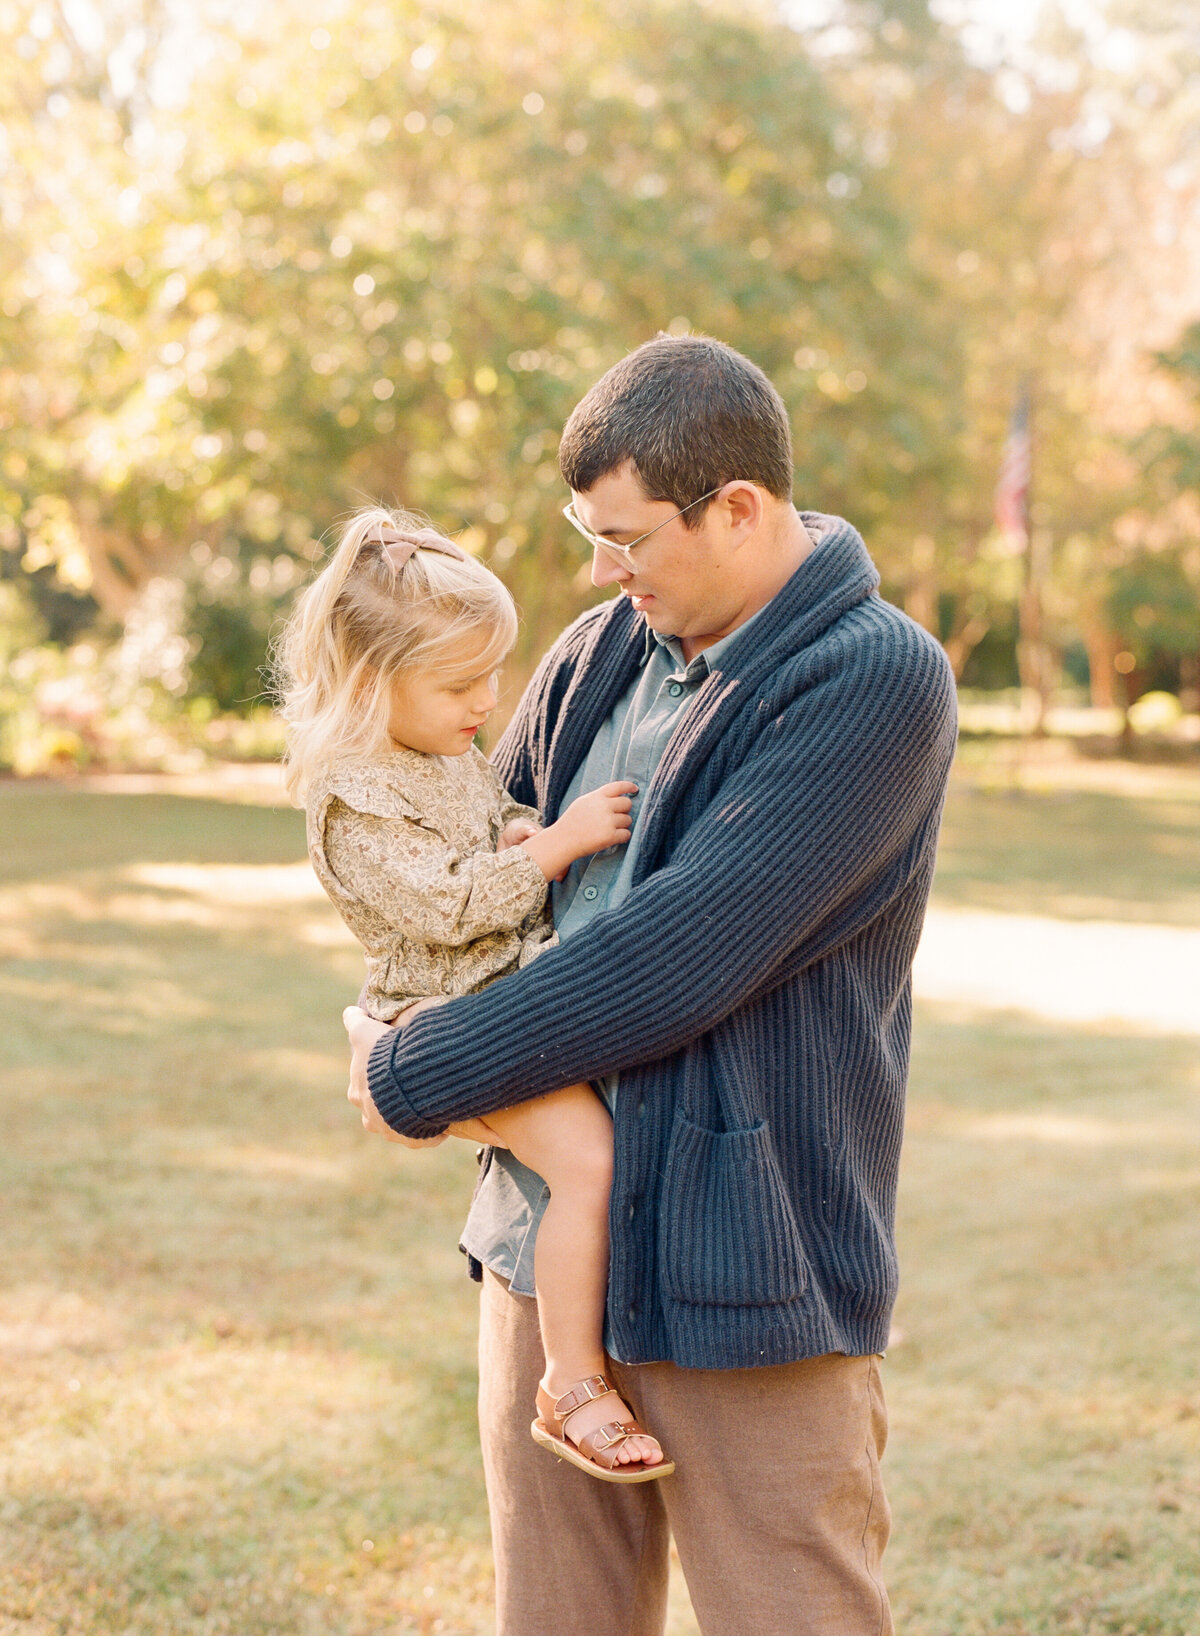 Dad holds daughter during a fall family portrait session in Raleigh. Family walking during their family portrait session in Wake Forest, NC. Photographed by Raleigh family photographer A.J. Dunlap Photography.